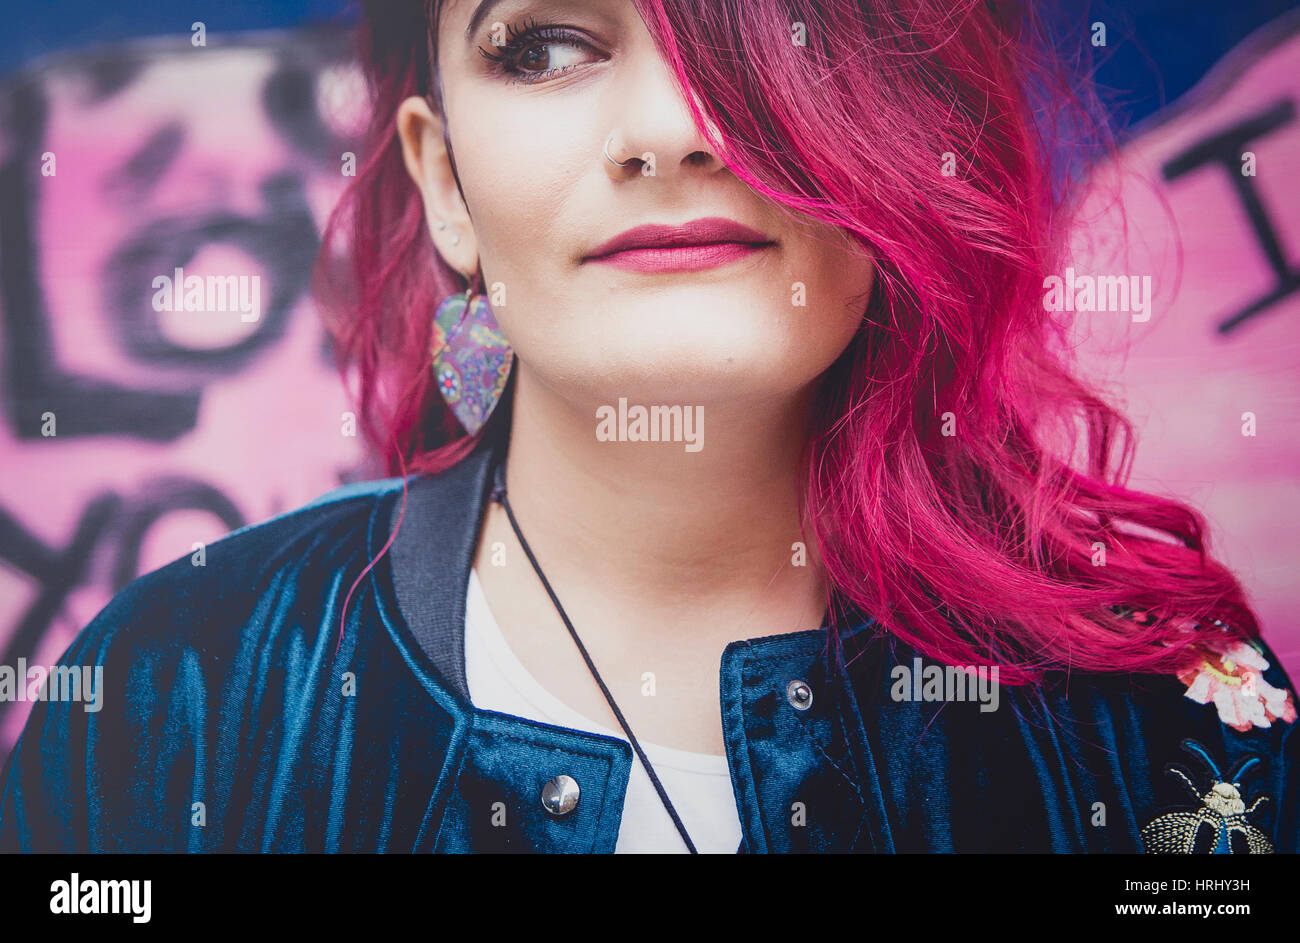 Woman with pink hair - street style Stock Photo